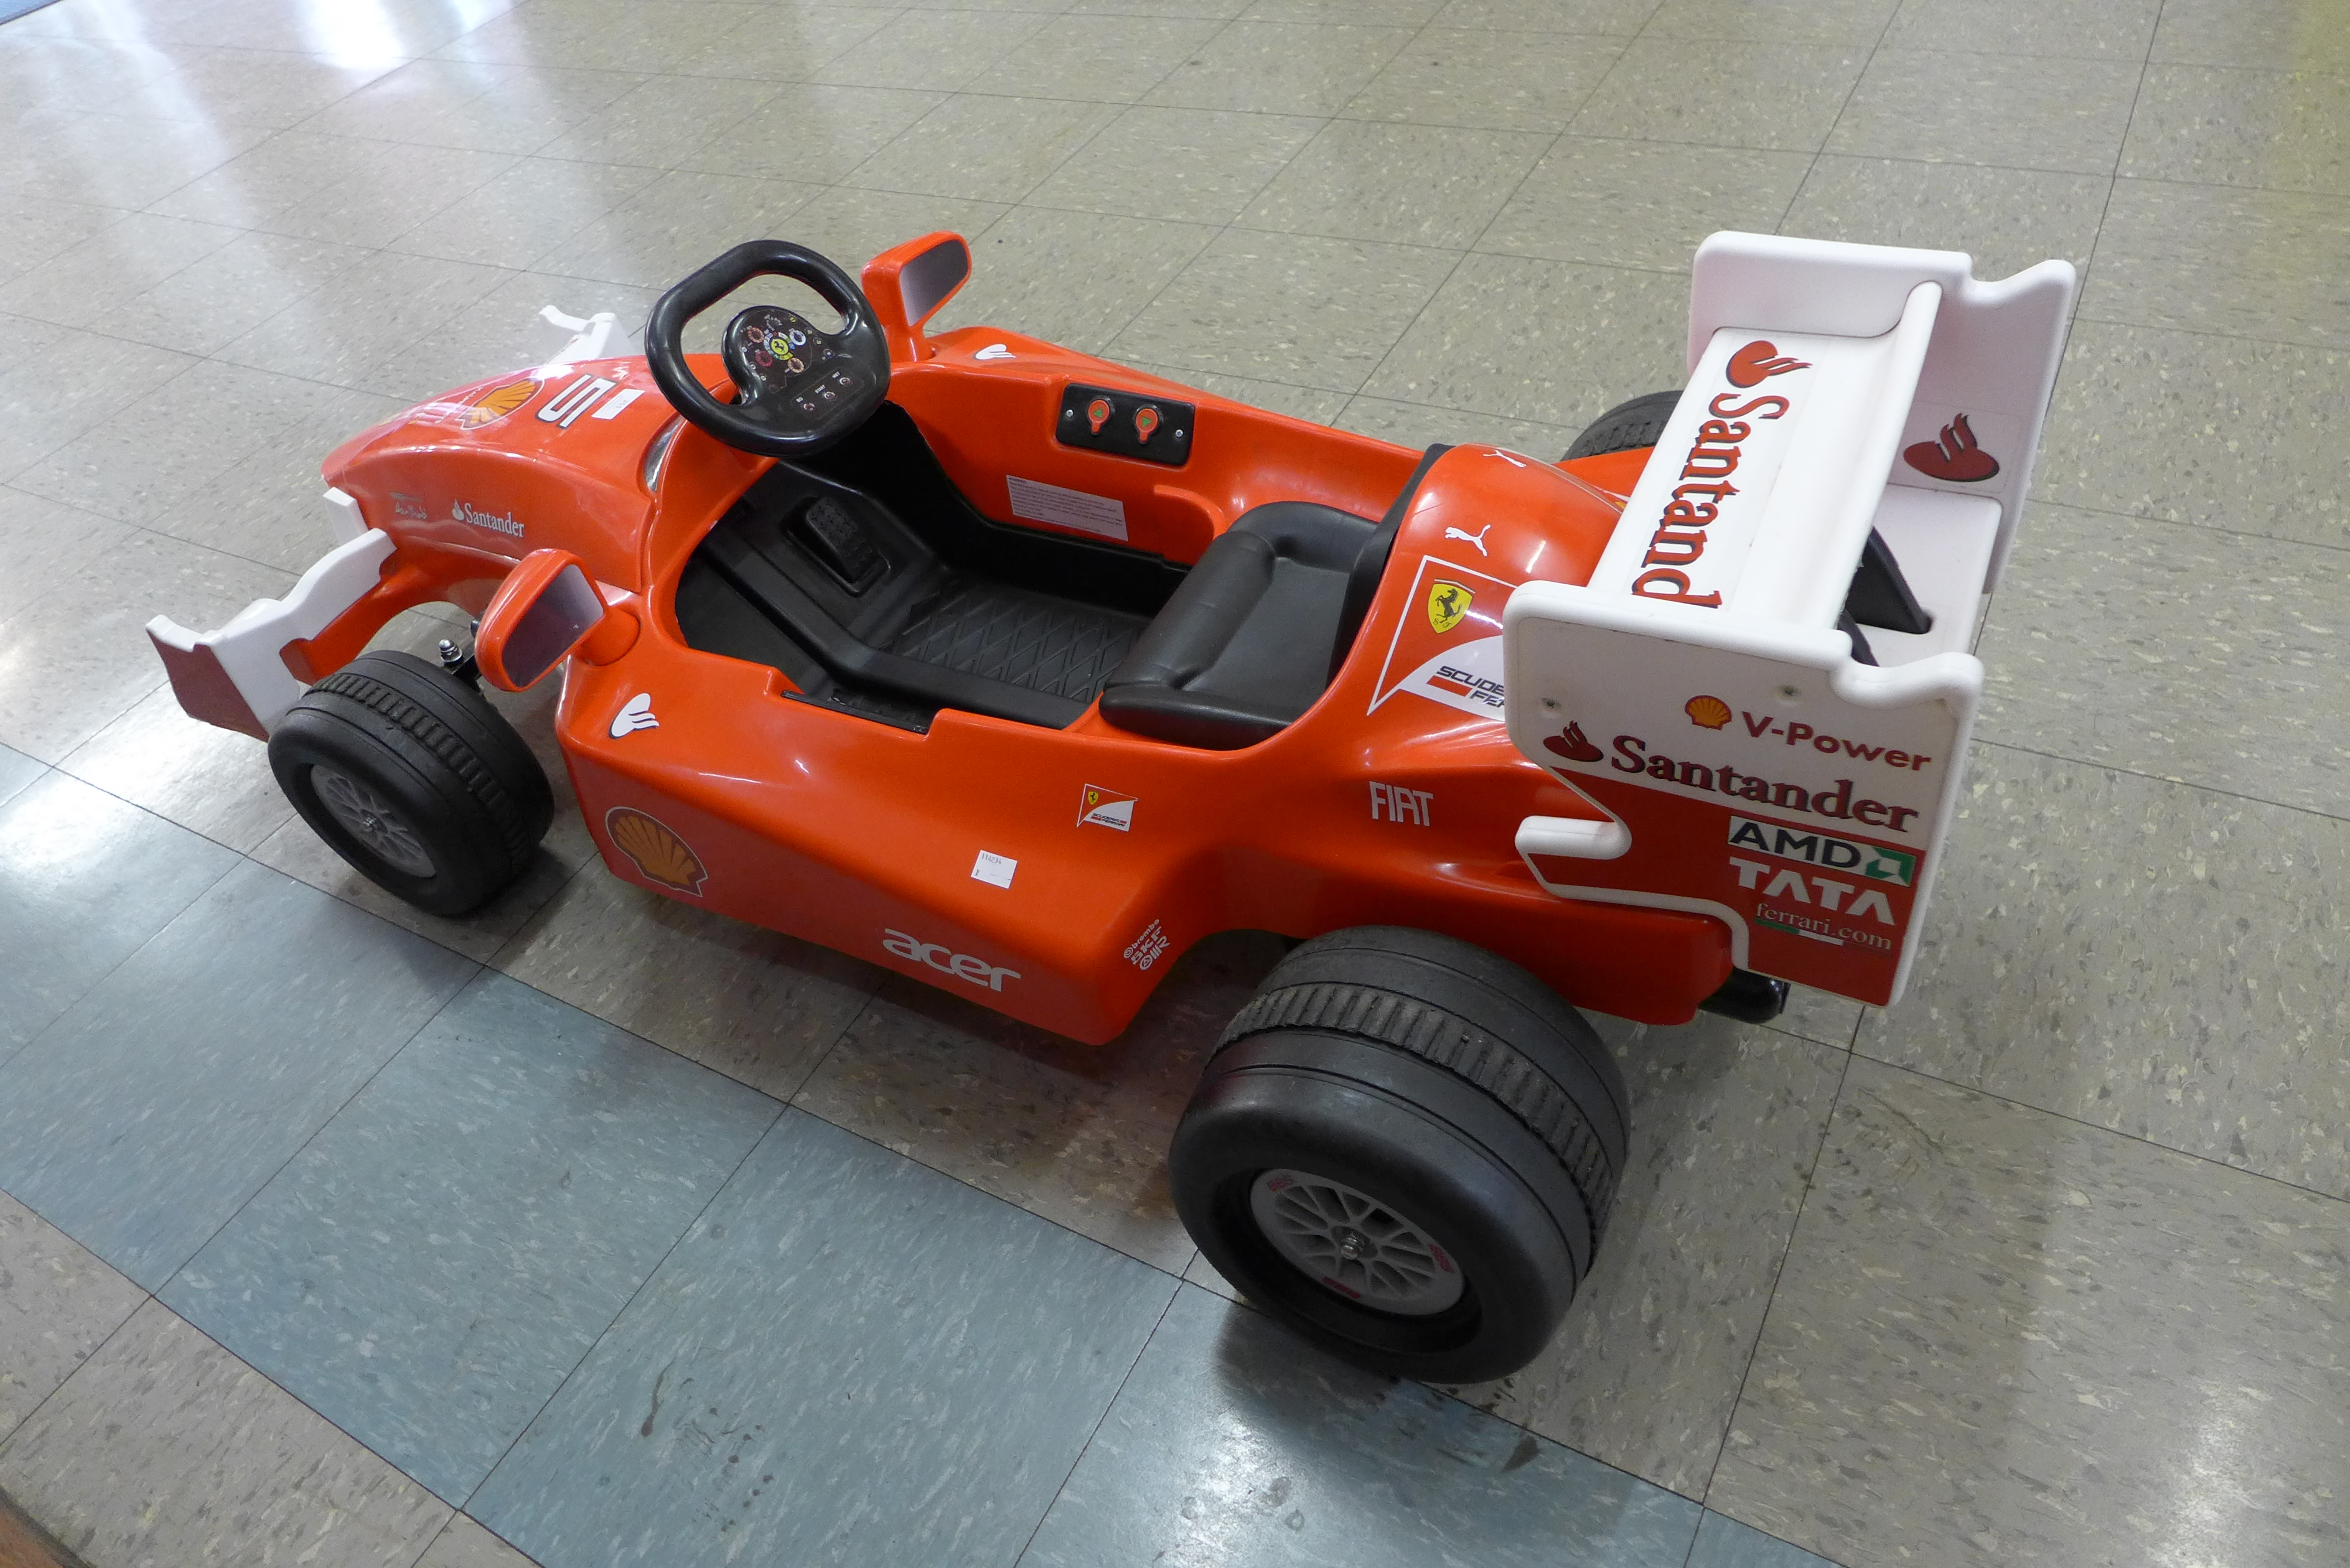 A limited edition Ferrari F1 Indy ride on car, Formula 1 W/12 volt battery power - with charging - Image 4 of 7